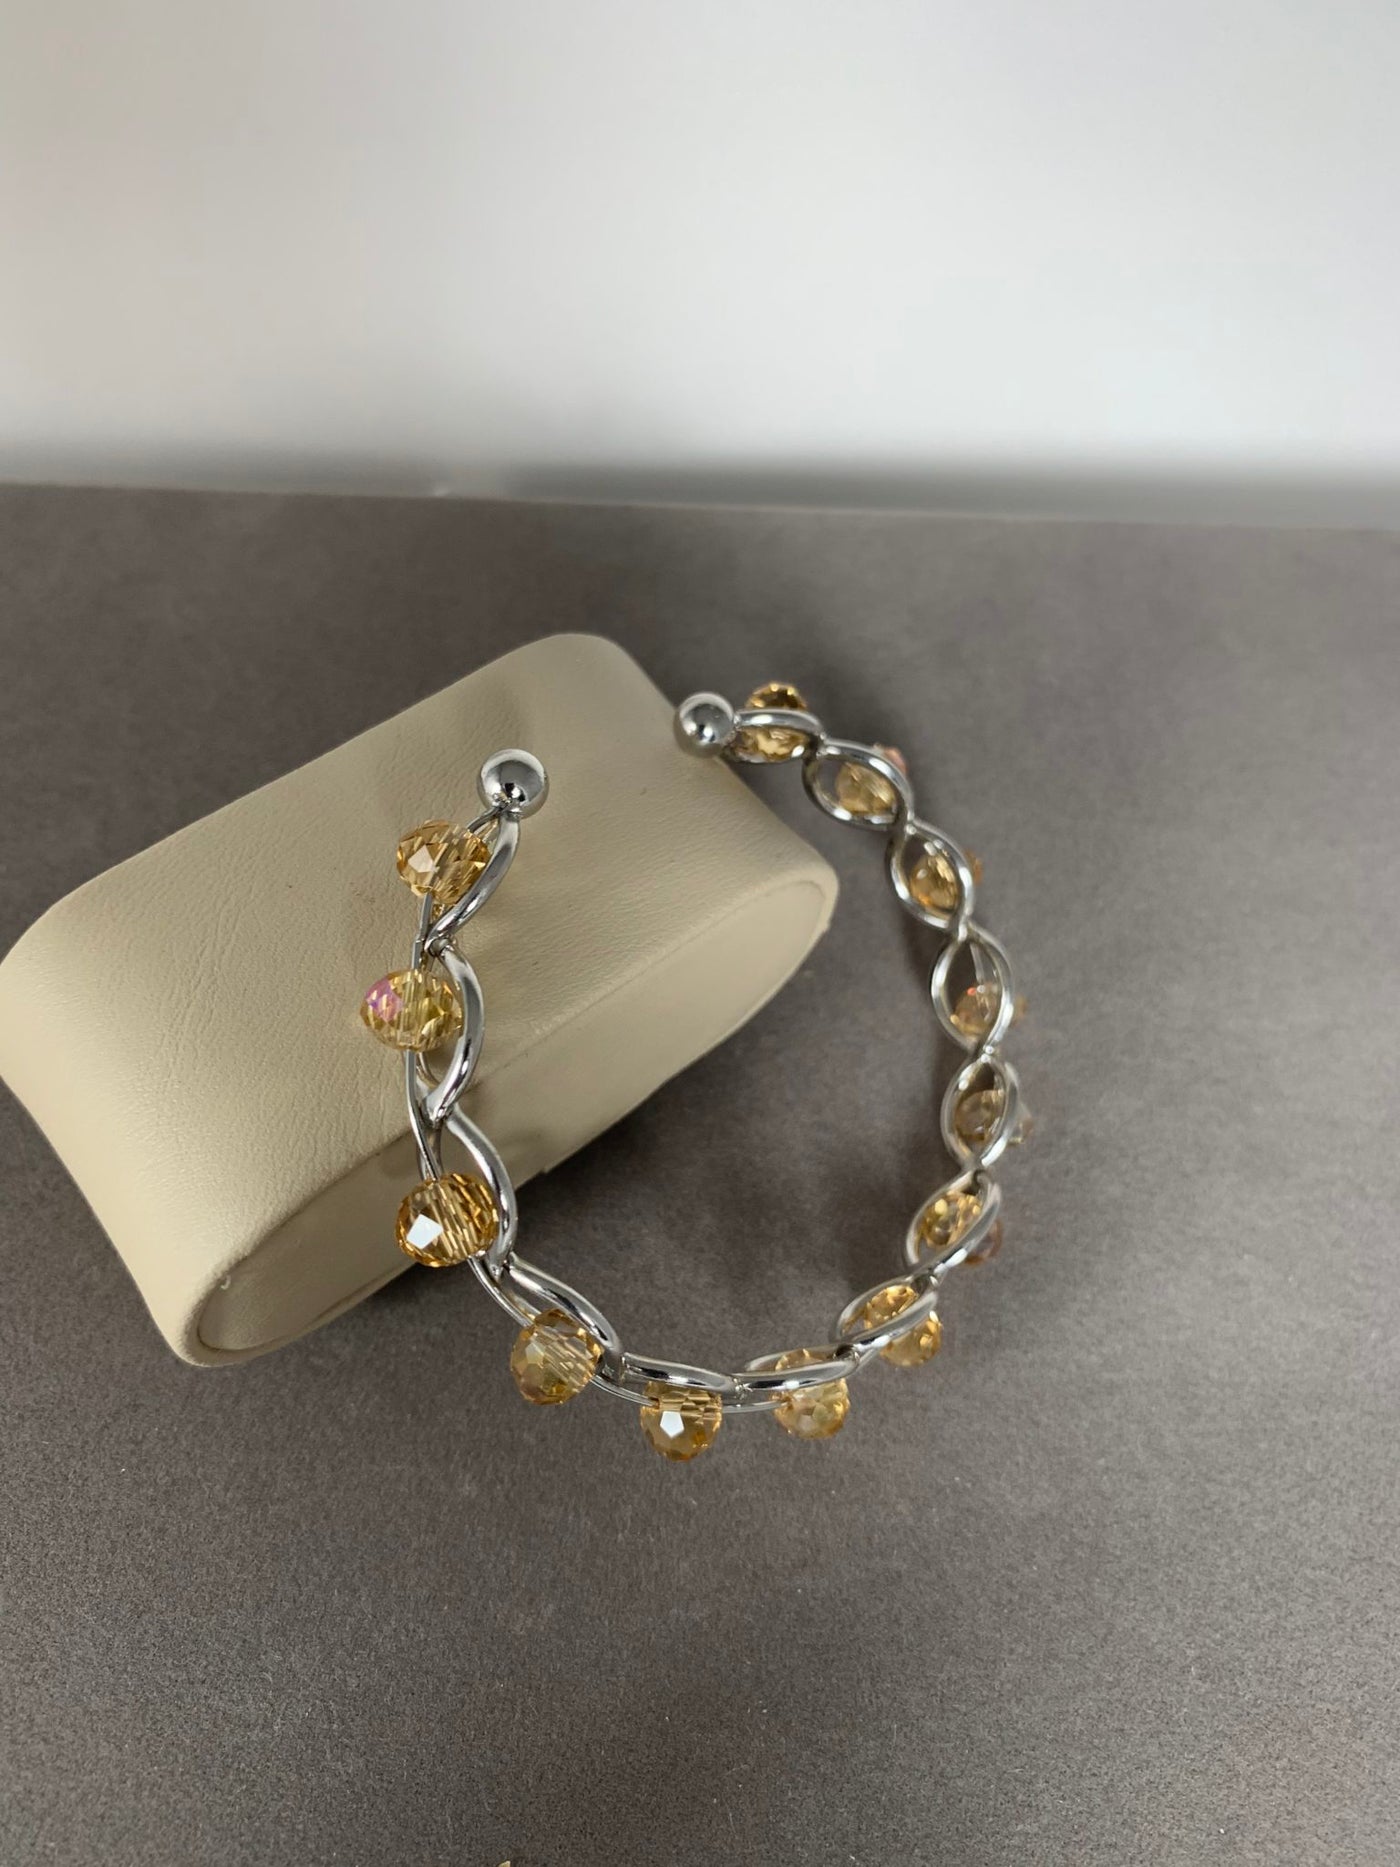 Silver Tone Cuff Bangle with Yellow Crystals